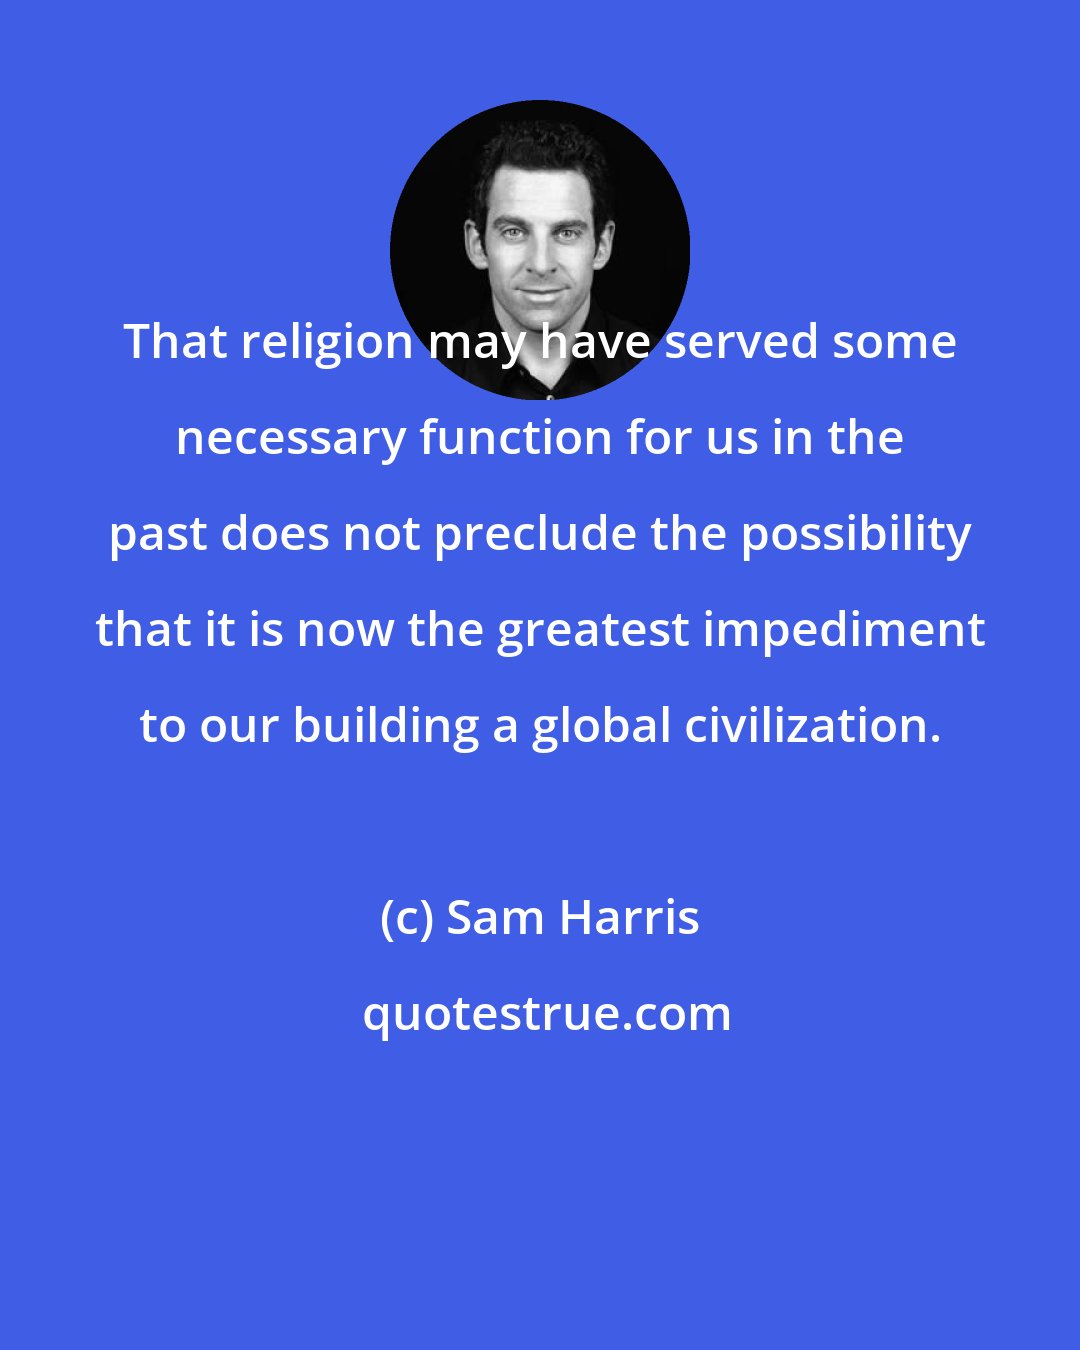 Sam Harris: That religion may have served some necessary function for us in the past does not preclude the possibility that it is now the greatest impediment to our building a global civilization.